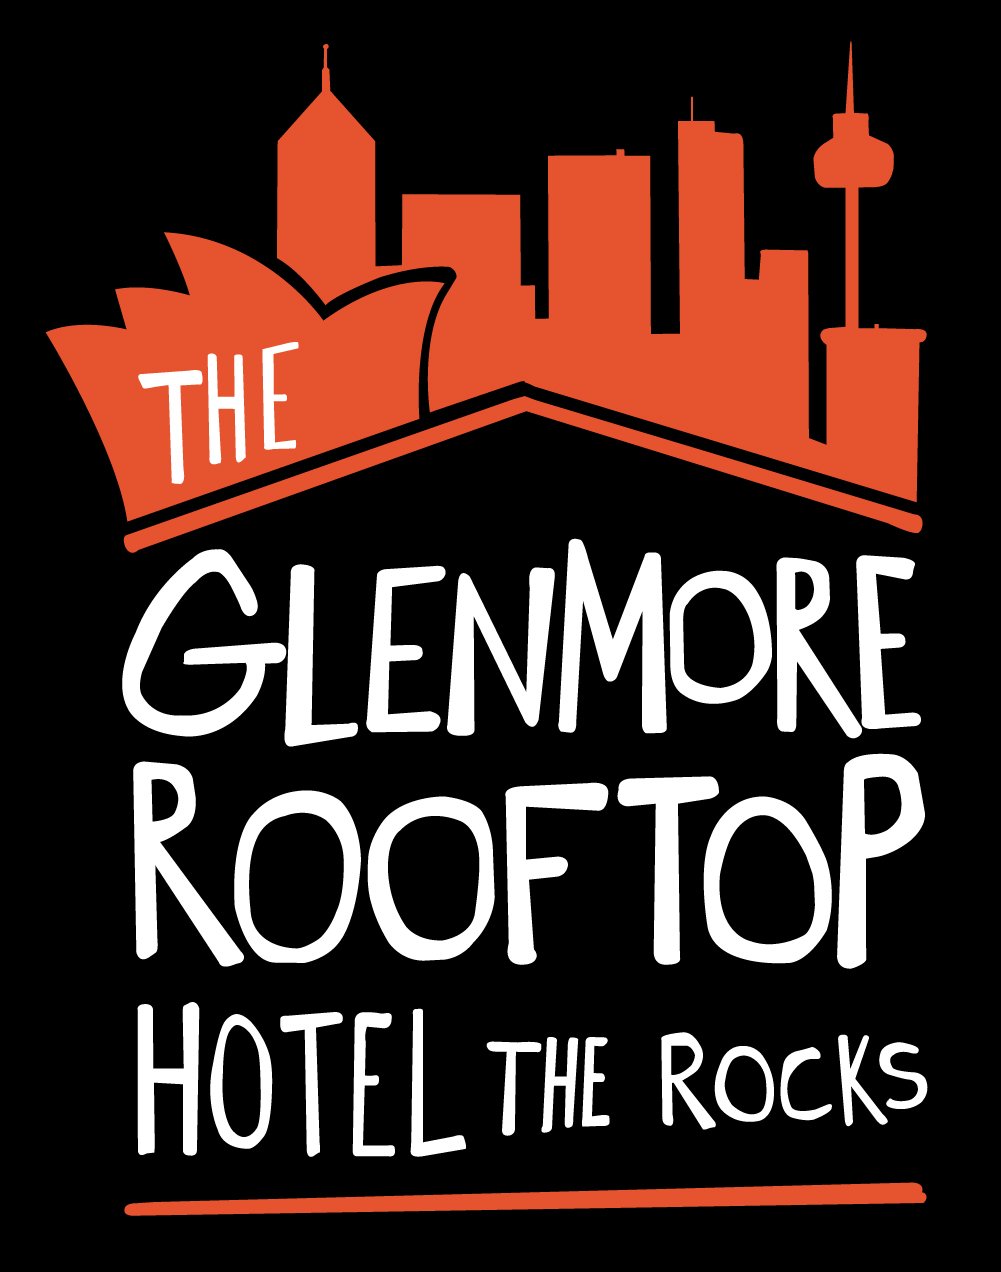 The Glenmore Rooftop Hotel